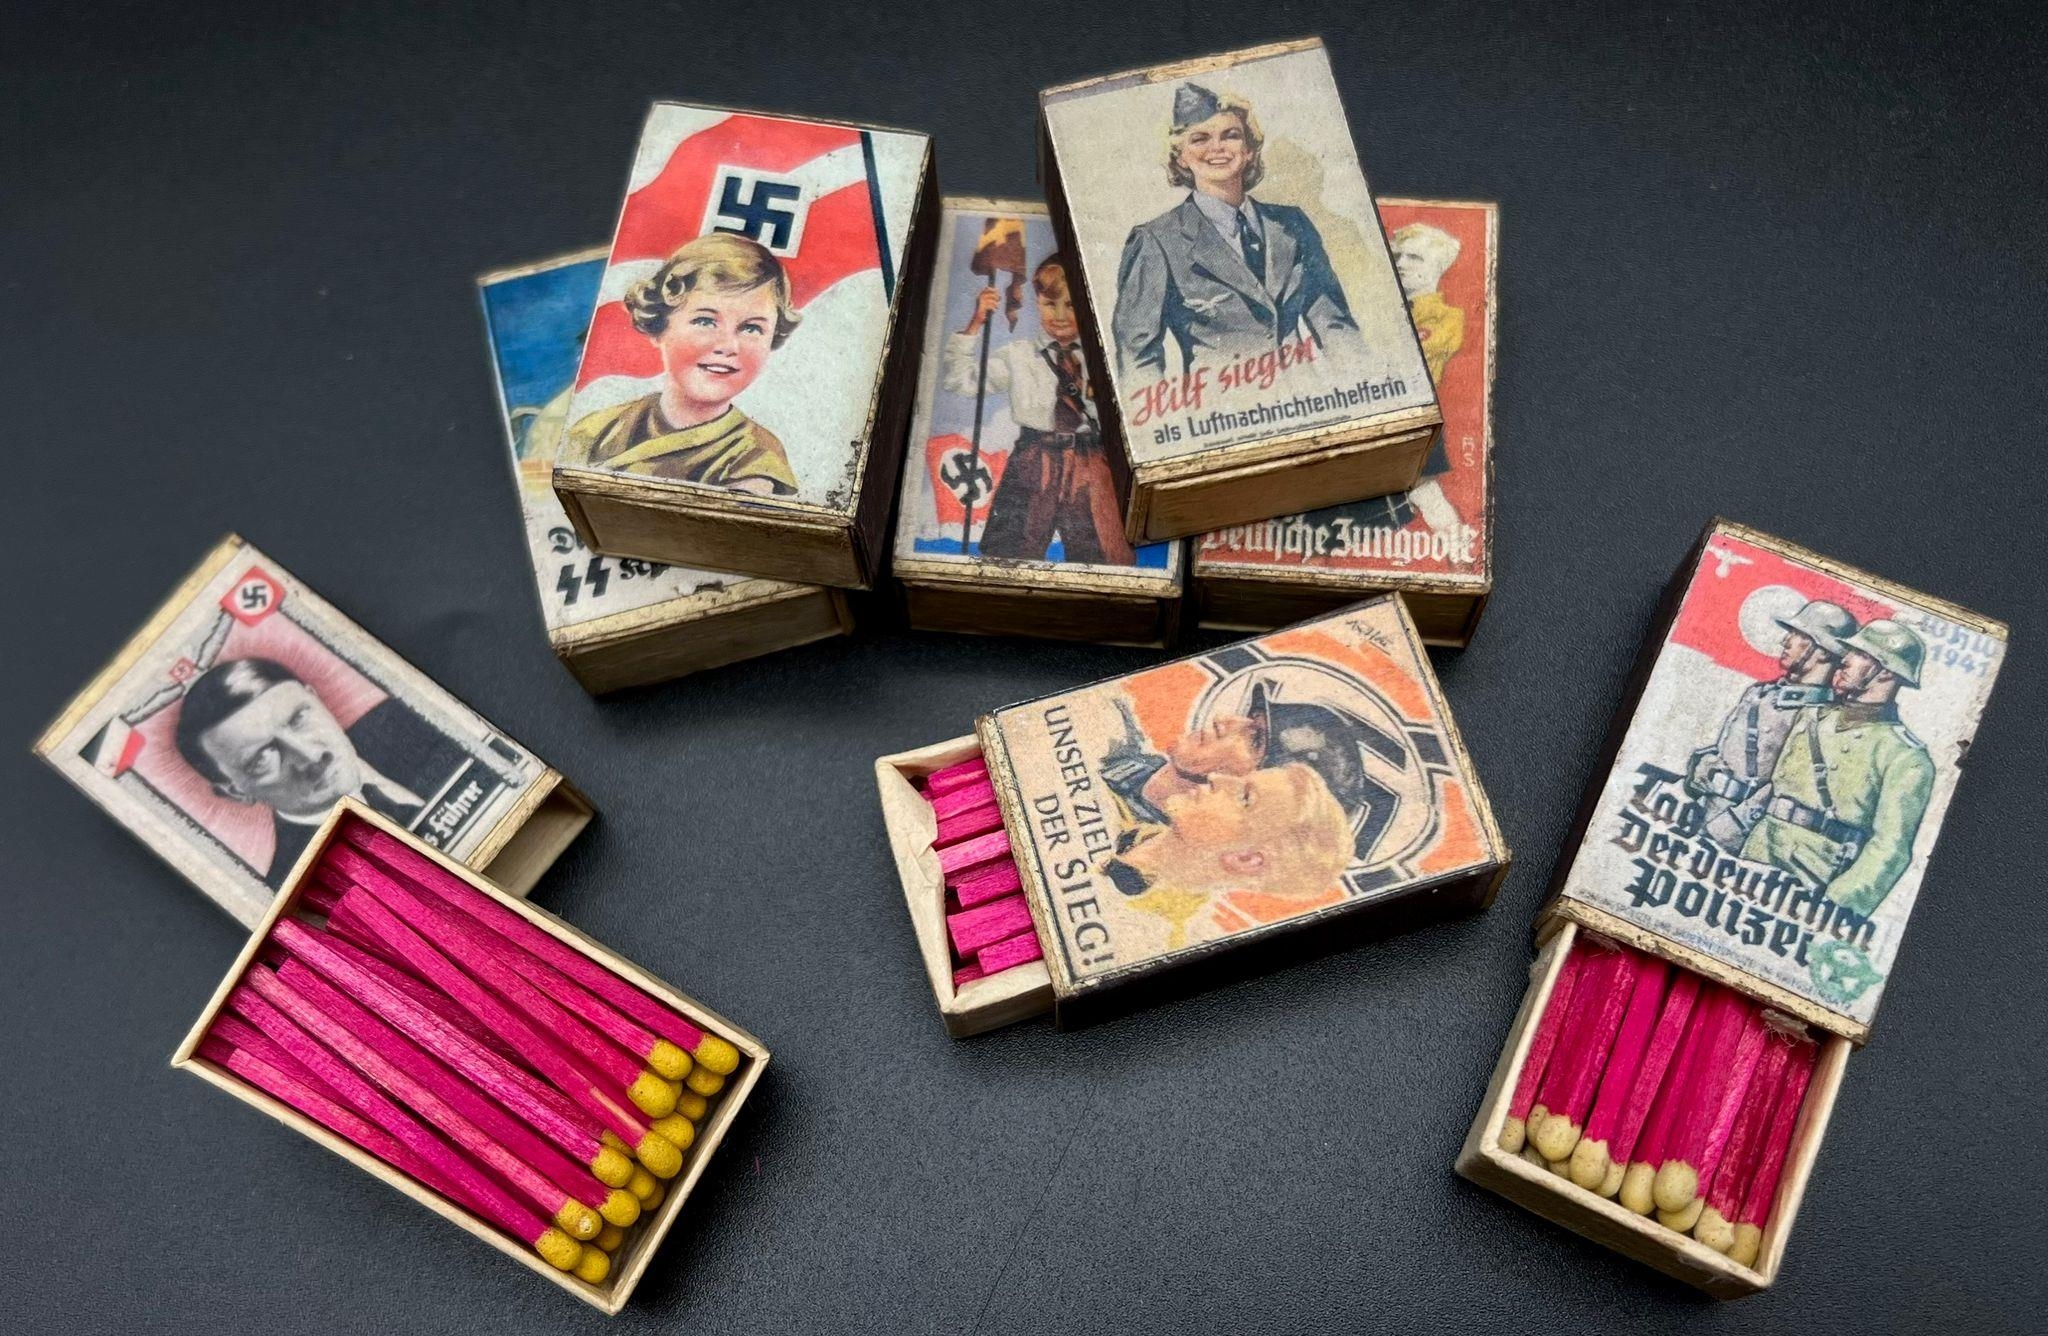 8 x Mini Boxes of Matches. As sold by blind veterans, Hitler Youth etc. - Image 6 of 6